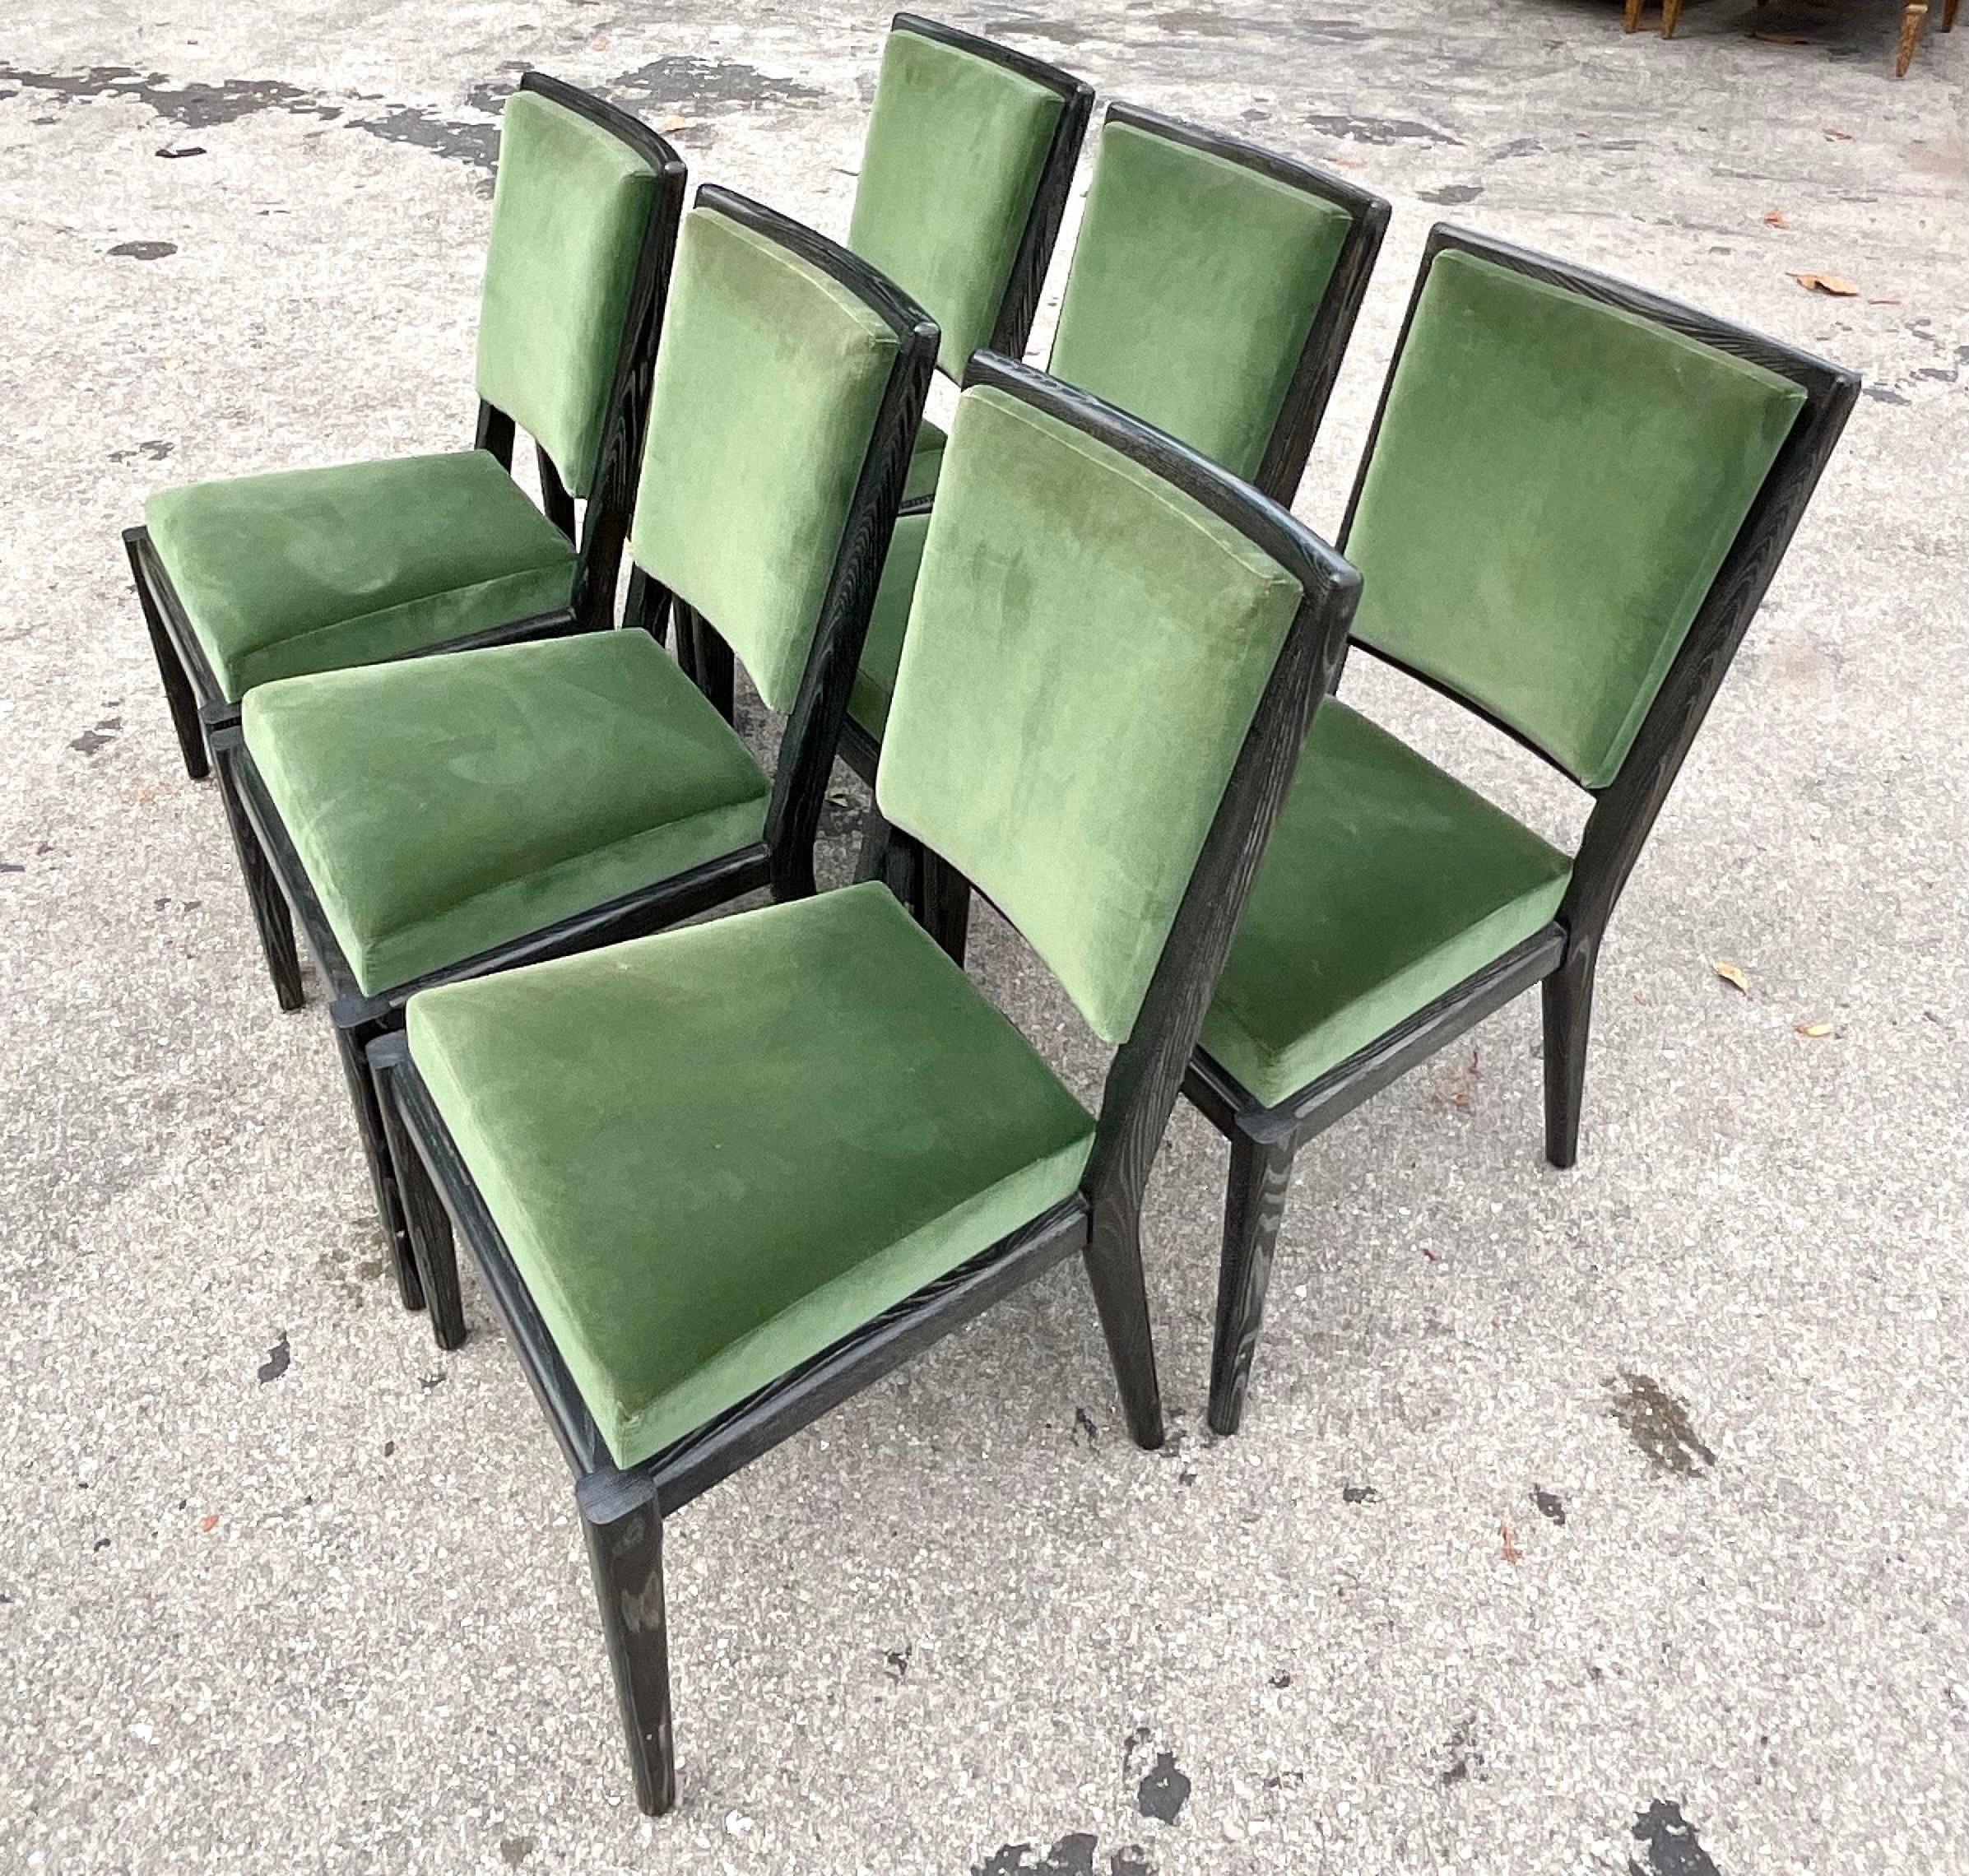 An exceptional set of six vintage Contemporary dining chairs. Made by the David Iatesta group. Beautiful hand made chairs in a lacquered ash wood. Green velvet seats with a chic pattered jacquard on the seat backs. Signed. Acquired from a Palm Beach